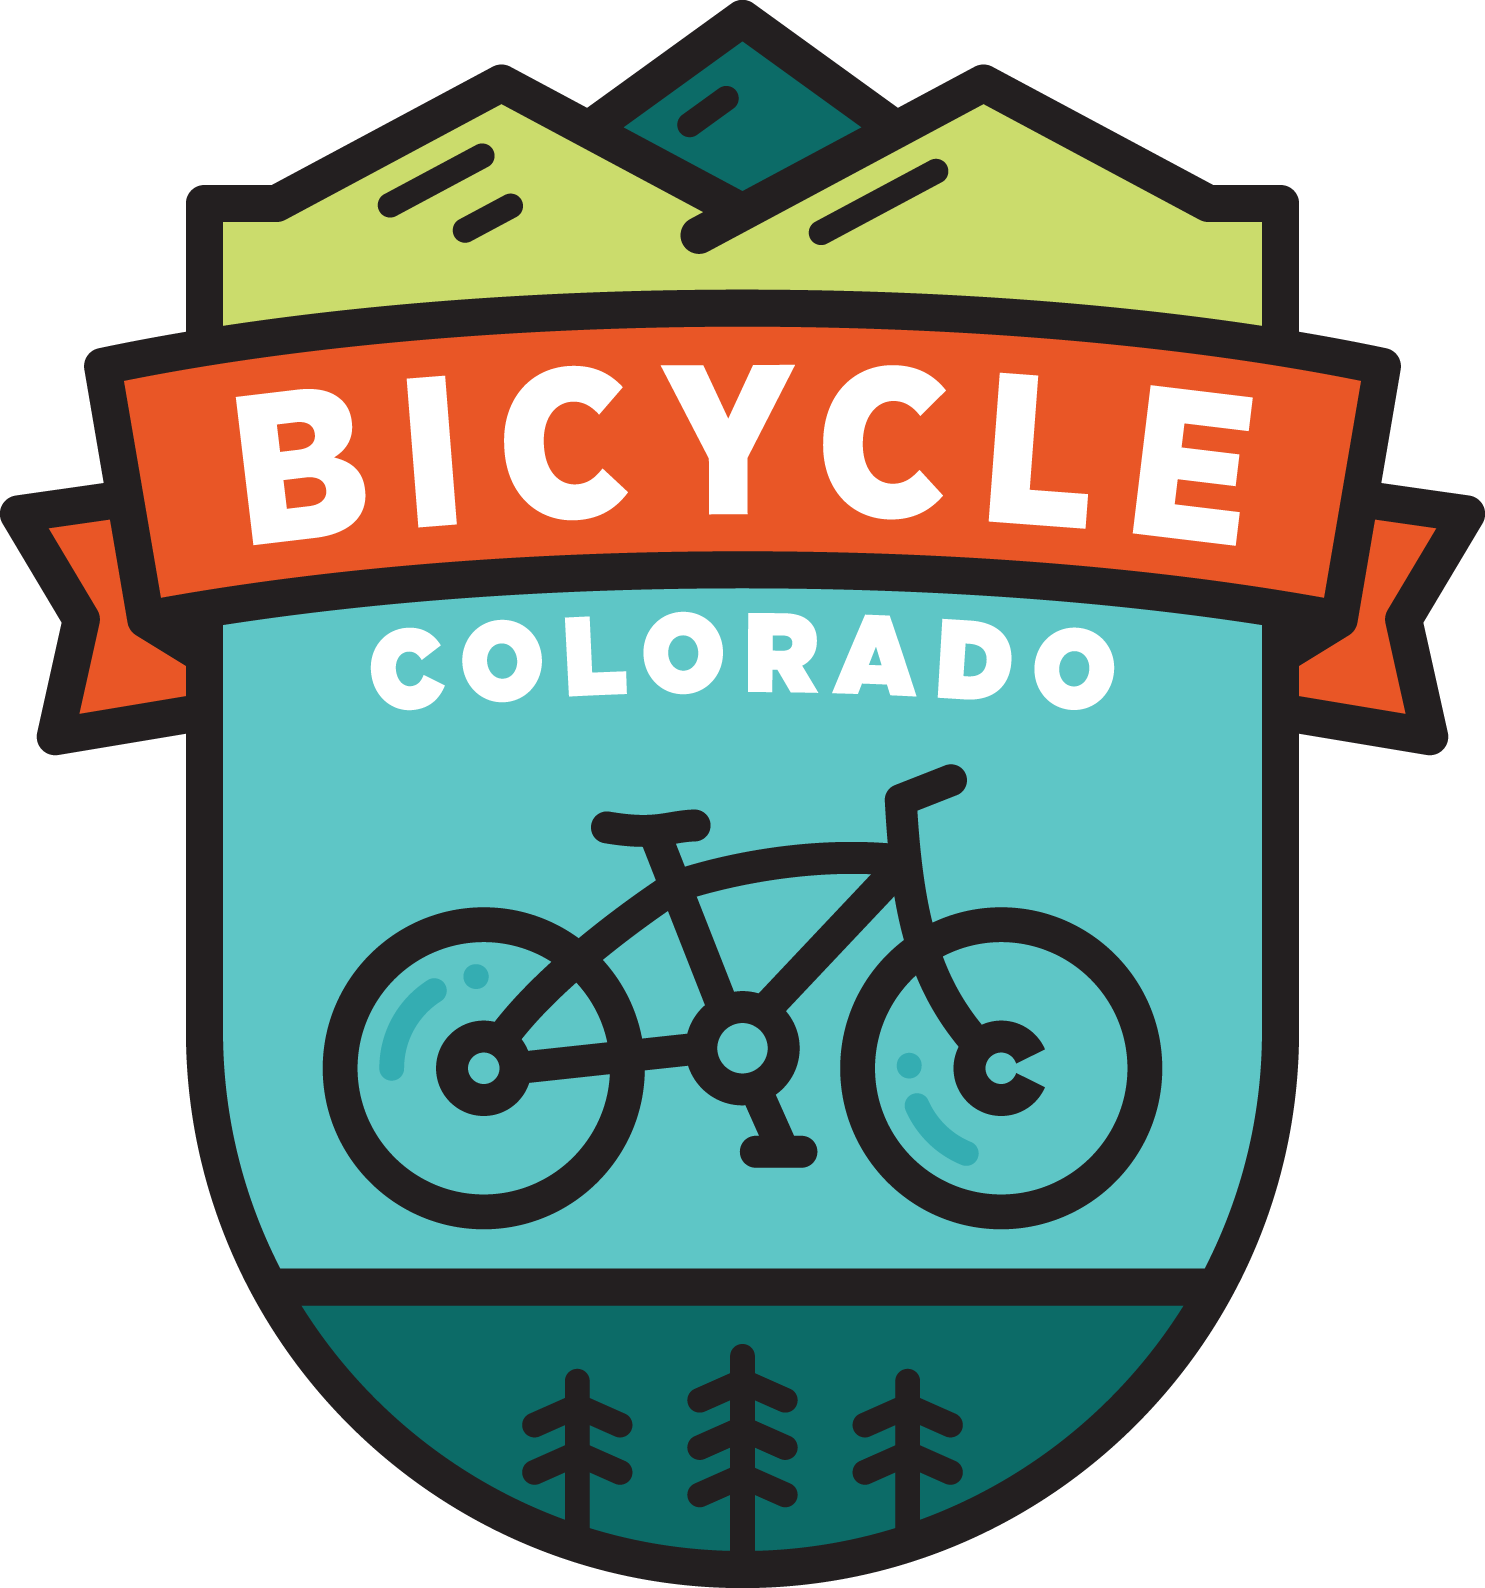 Bicycle Colorado’s Vision for Cycling Events